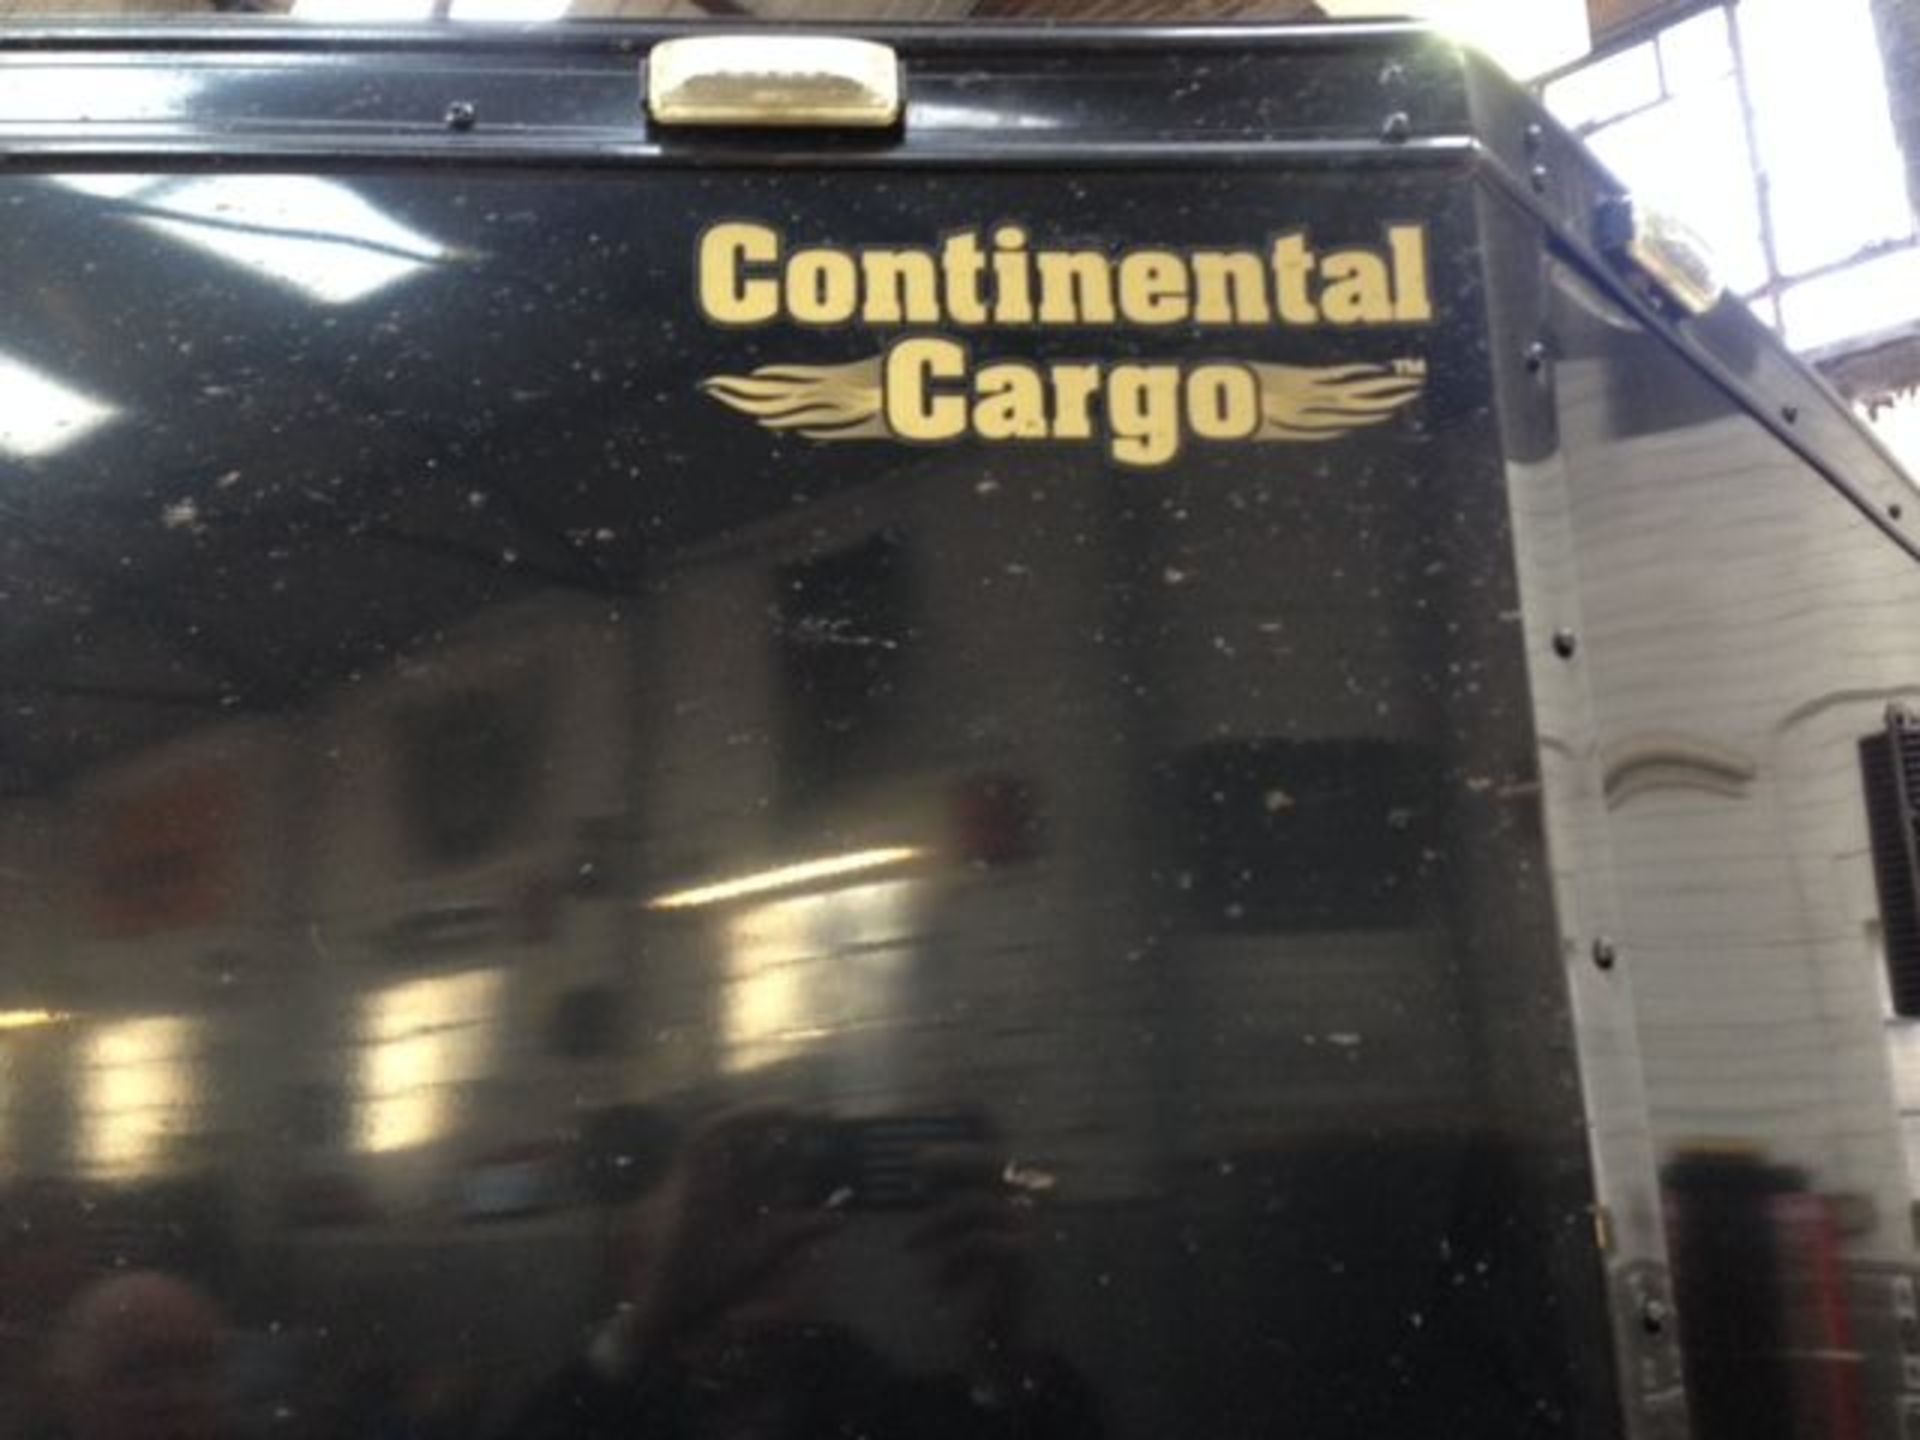 2014 CONTINENTAL CARGO - chassis number SNHUTW424EY020040, offered with the Certificate of Origin, - Image 5 of 7